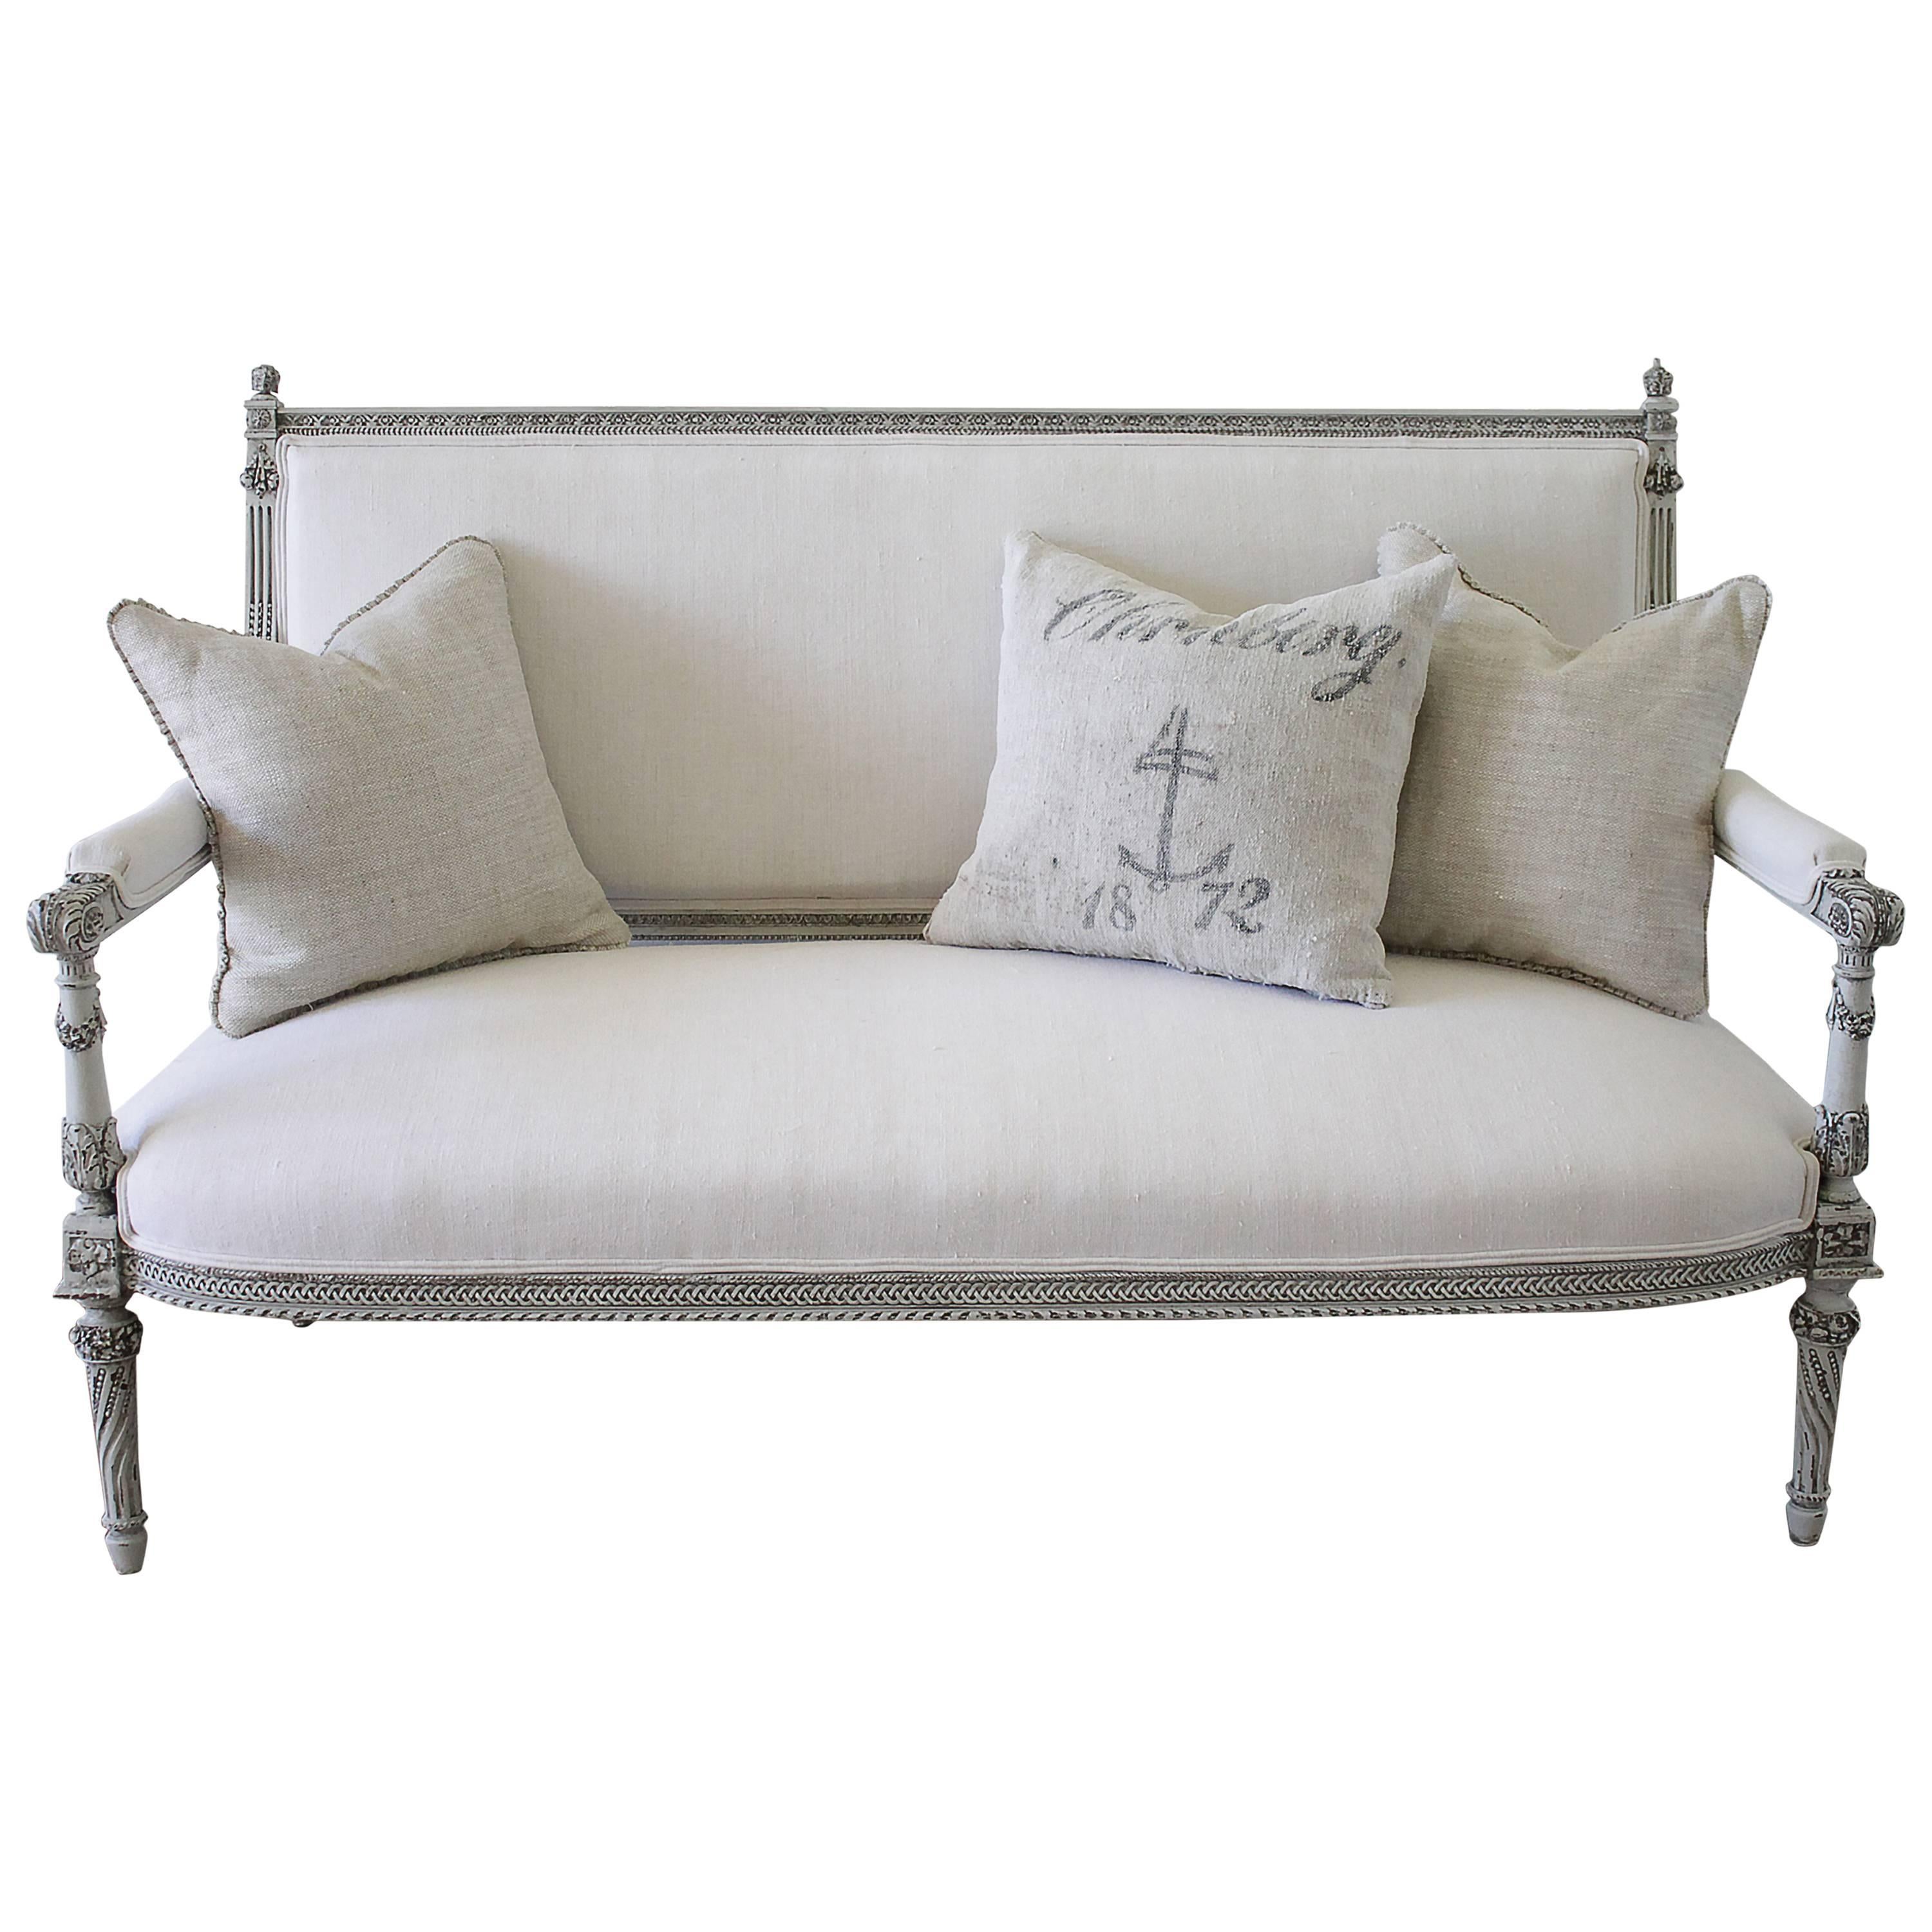 19th Century Painted Rose Carved Louis XVI Style Settee in Belgian Linen